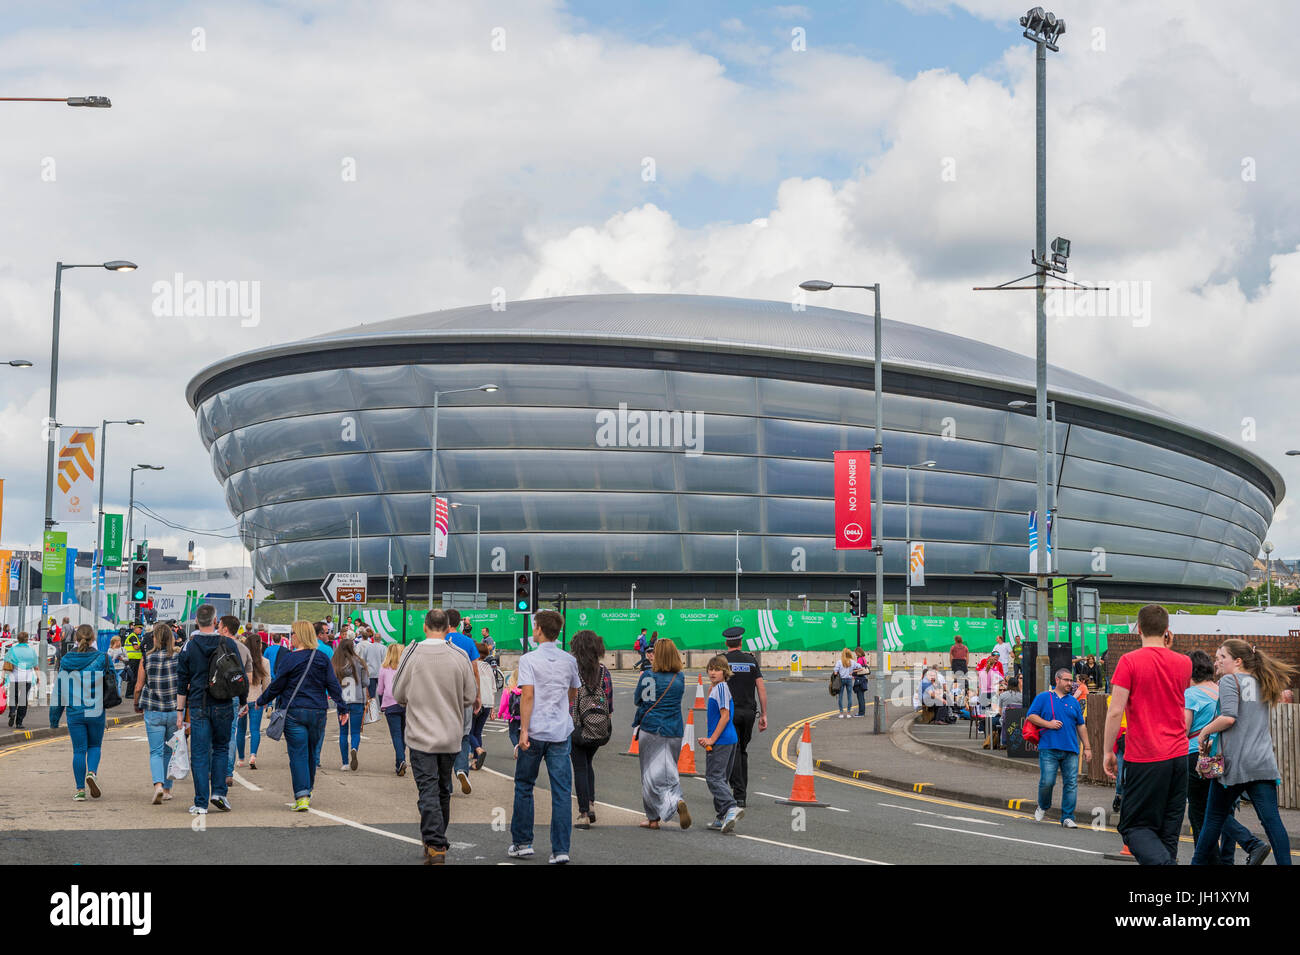 Glasgow, Scotland, UK - August 1, 2014: Member of the public making their way to a from events during the 2014 Commonwealth Games in Glasgow Stock Photo